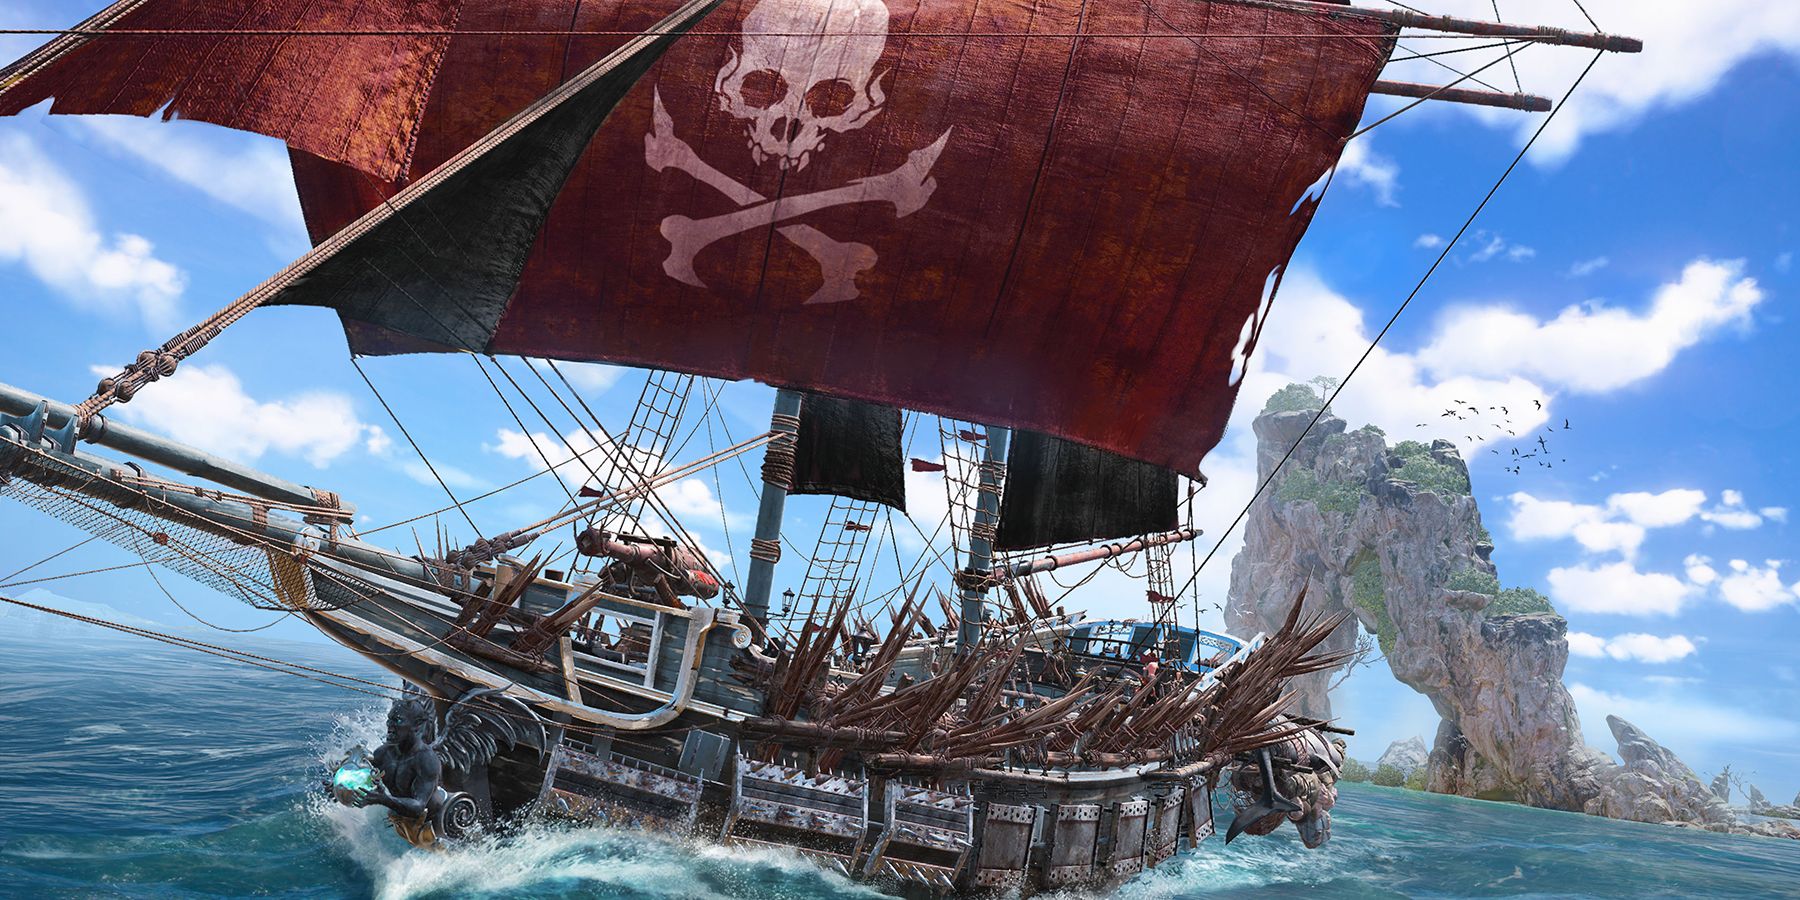 Skull & Bones' 2019 release date is the best thing to happen to it